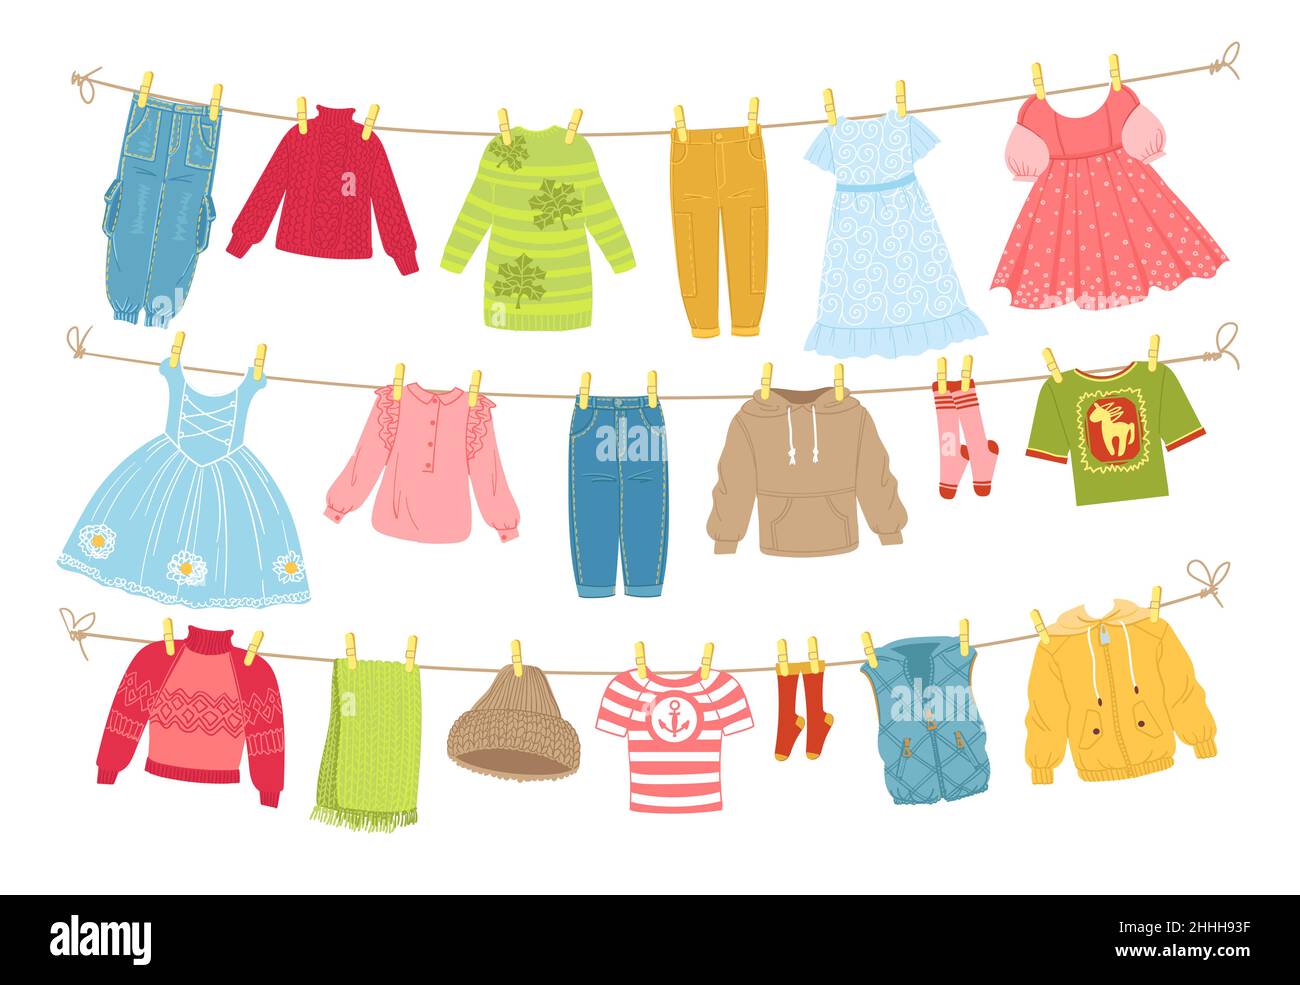 Baby clothes ropes. Washed garment hanging on cords and dries. Boyish and girly things on clothesline with clothespins. Dresses and trousers. Socks Stock Vector